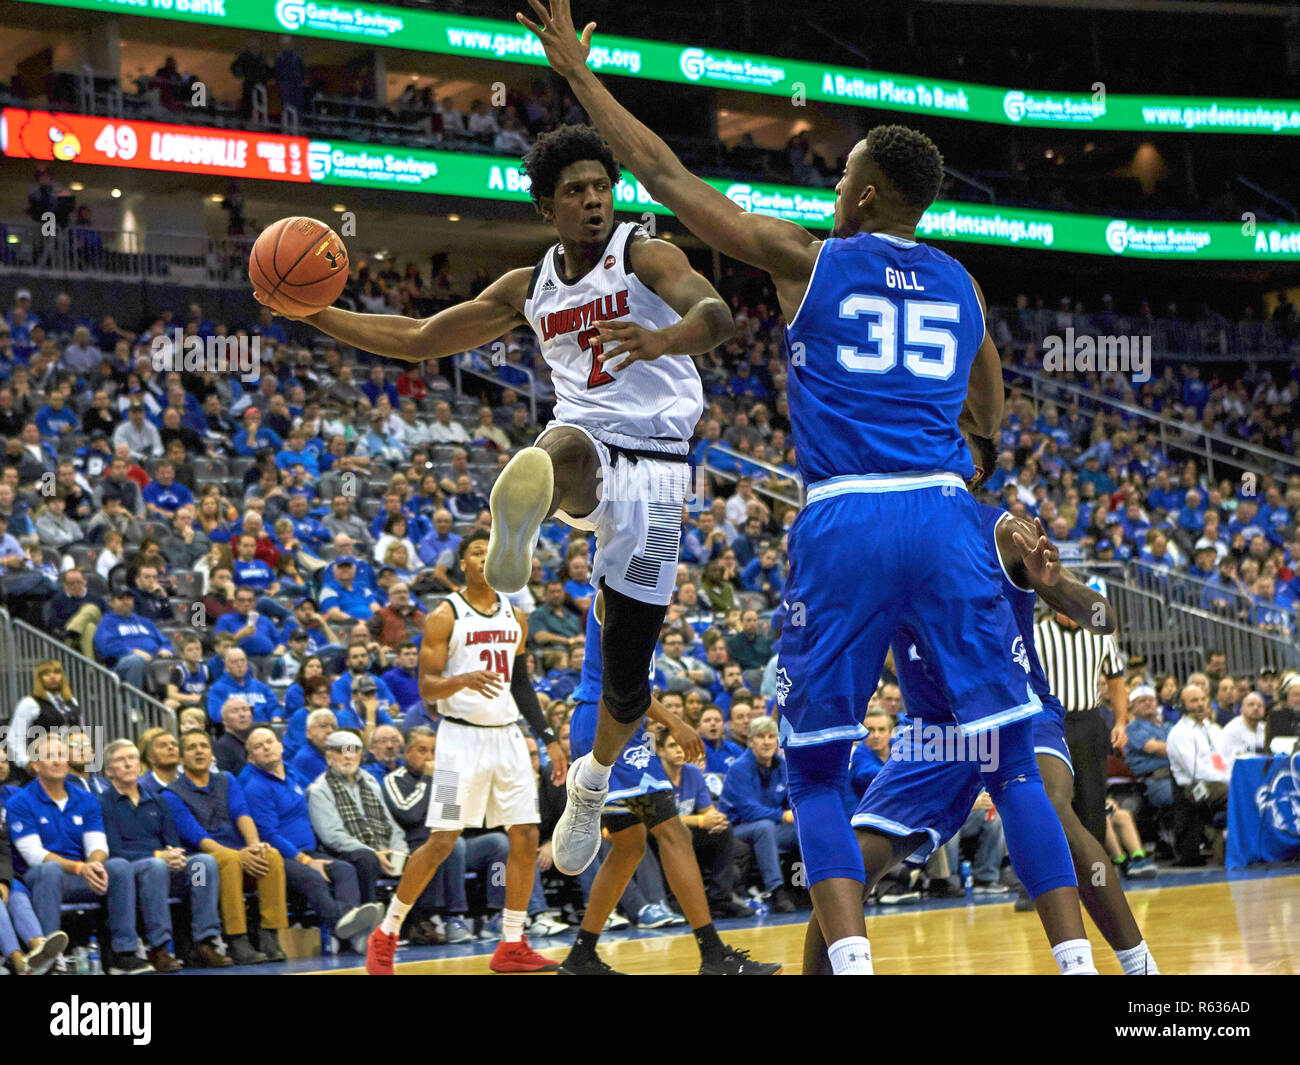 Newark, New Jersey, USA. 3rd Dec, 2018. Louisville Cardinals guard Darius Perry (2) looks to pass in the second half during NCAA Men's action between the Seton Hall Pirates and the Louisville Cardinals at the Prudential Center in Newark, New Jersey. Louisville defeated Seton Hall 70-65. Duncan Williams/CSM/Alamy Live News Stock Photo